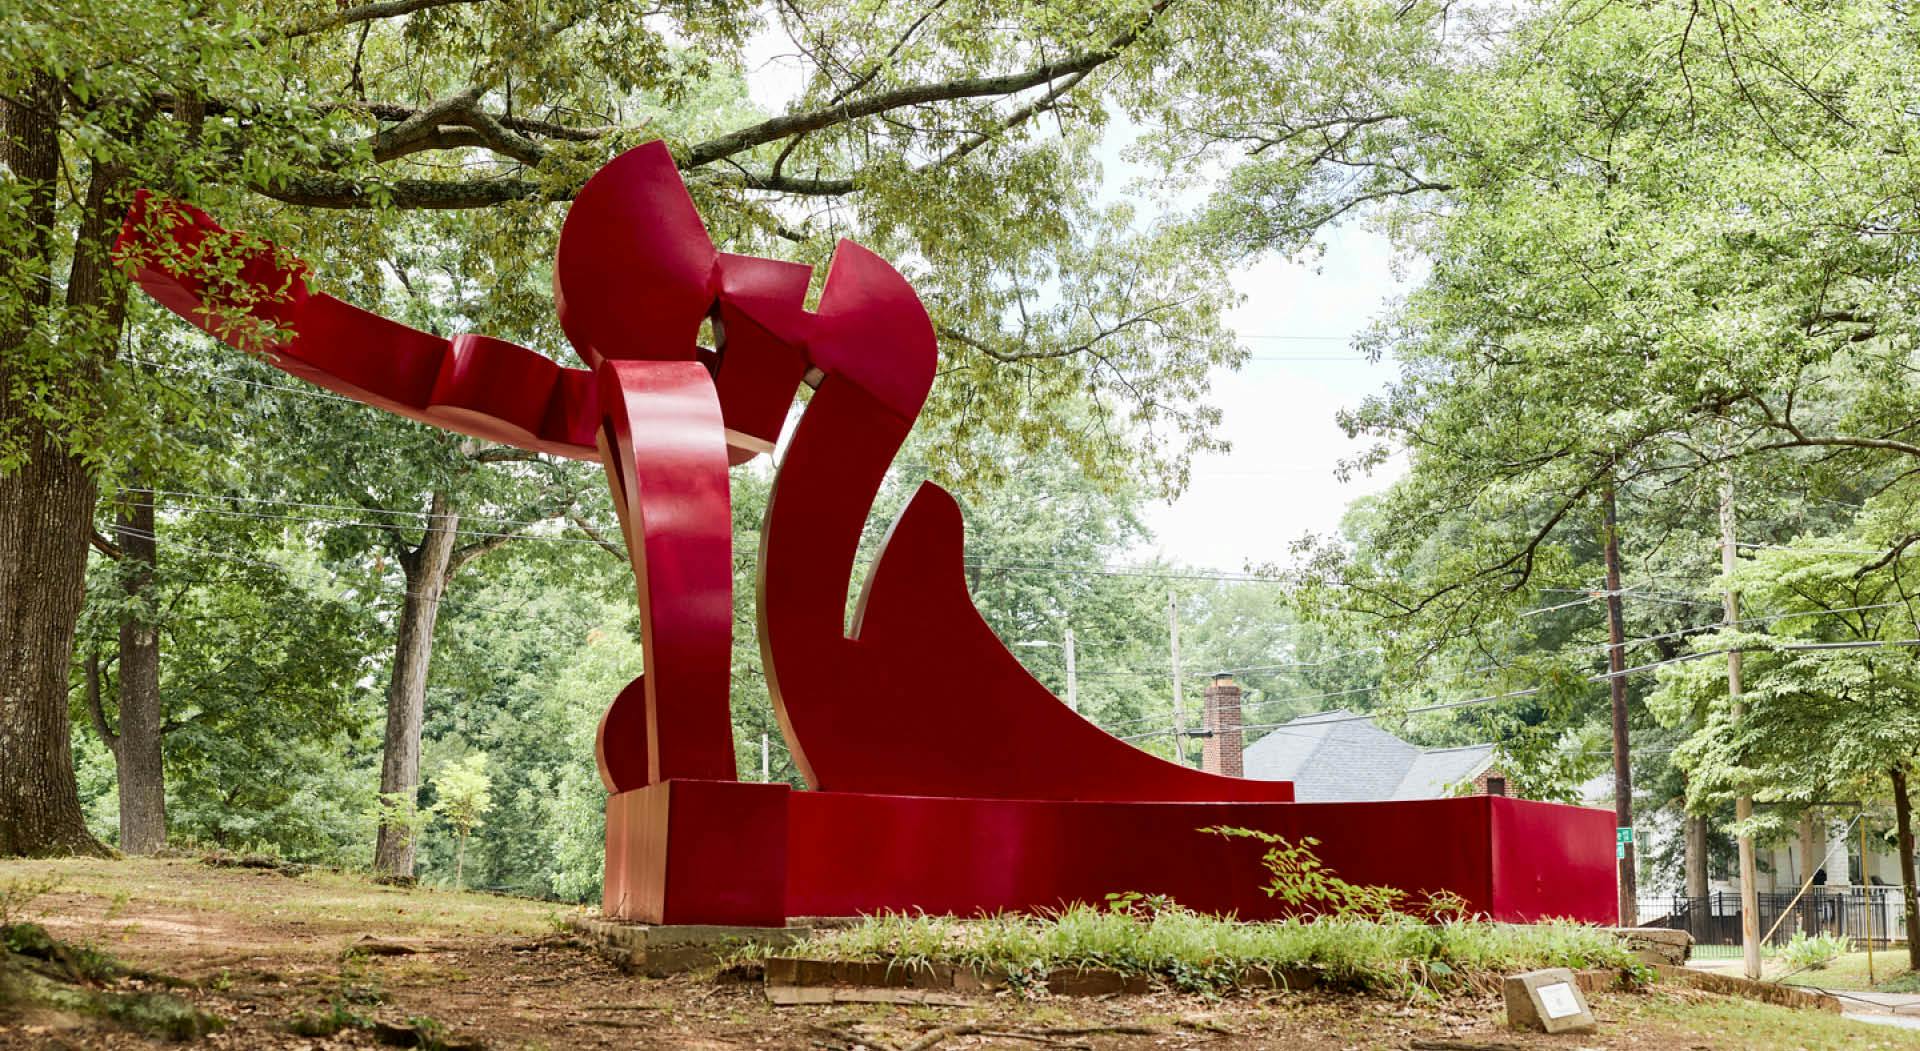 A large red abstract sculpture sits amongst the tall trees in Perkerson Park. (Photo Credit: Erin Sintos)